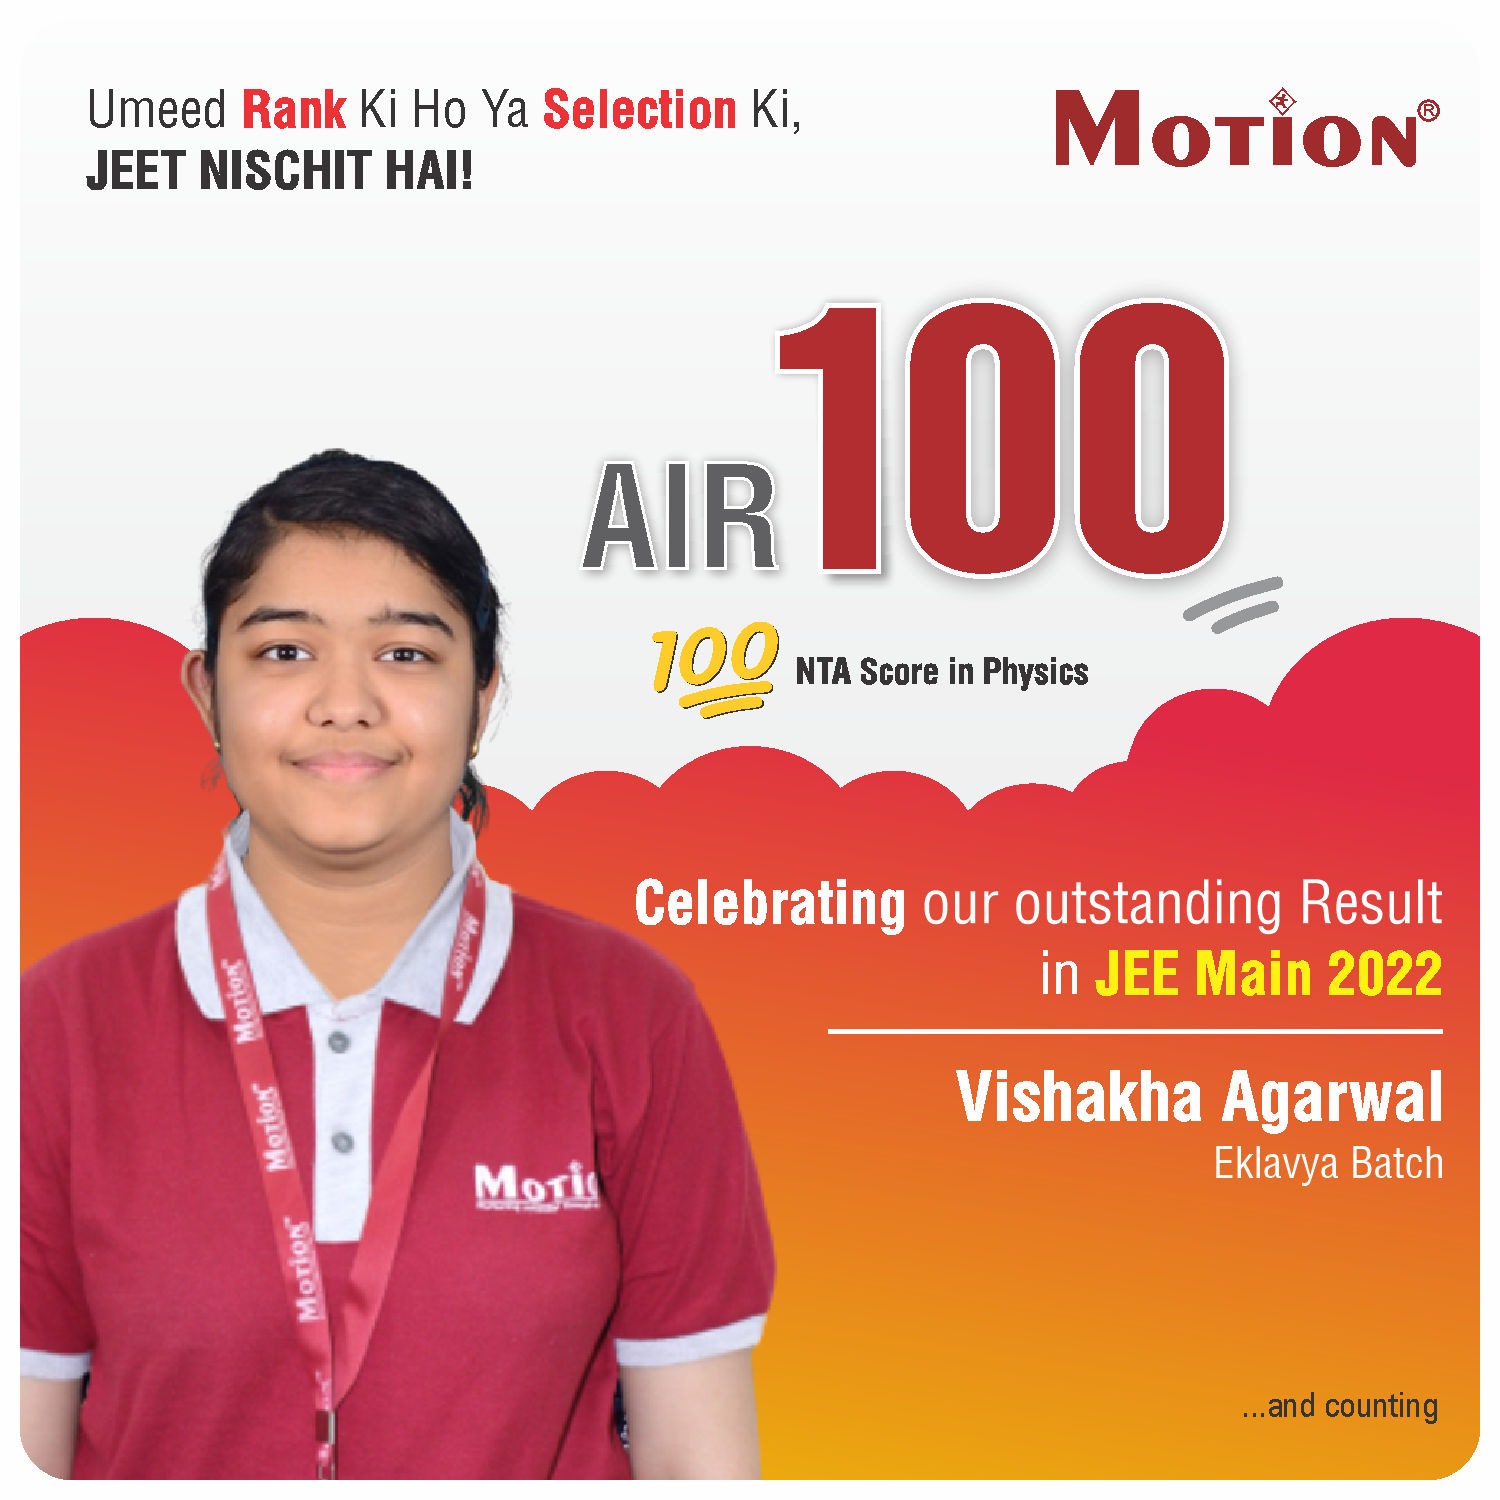 JEE Main Result 2022 Motion AIR 100